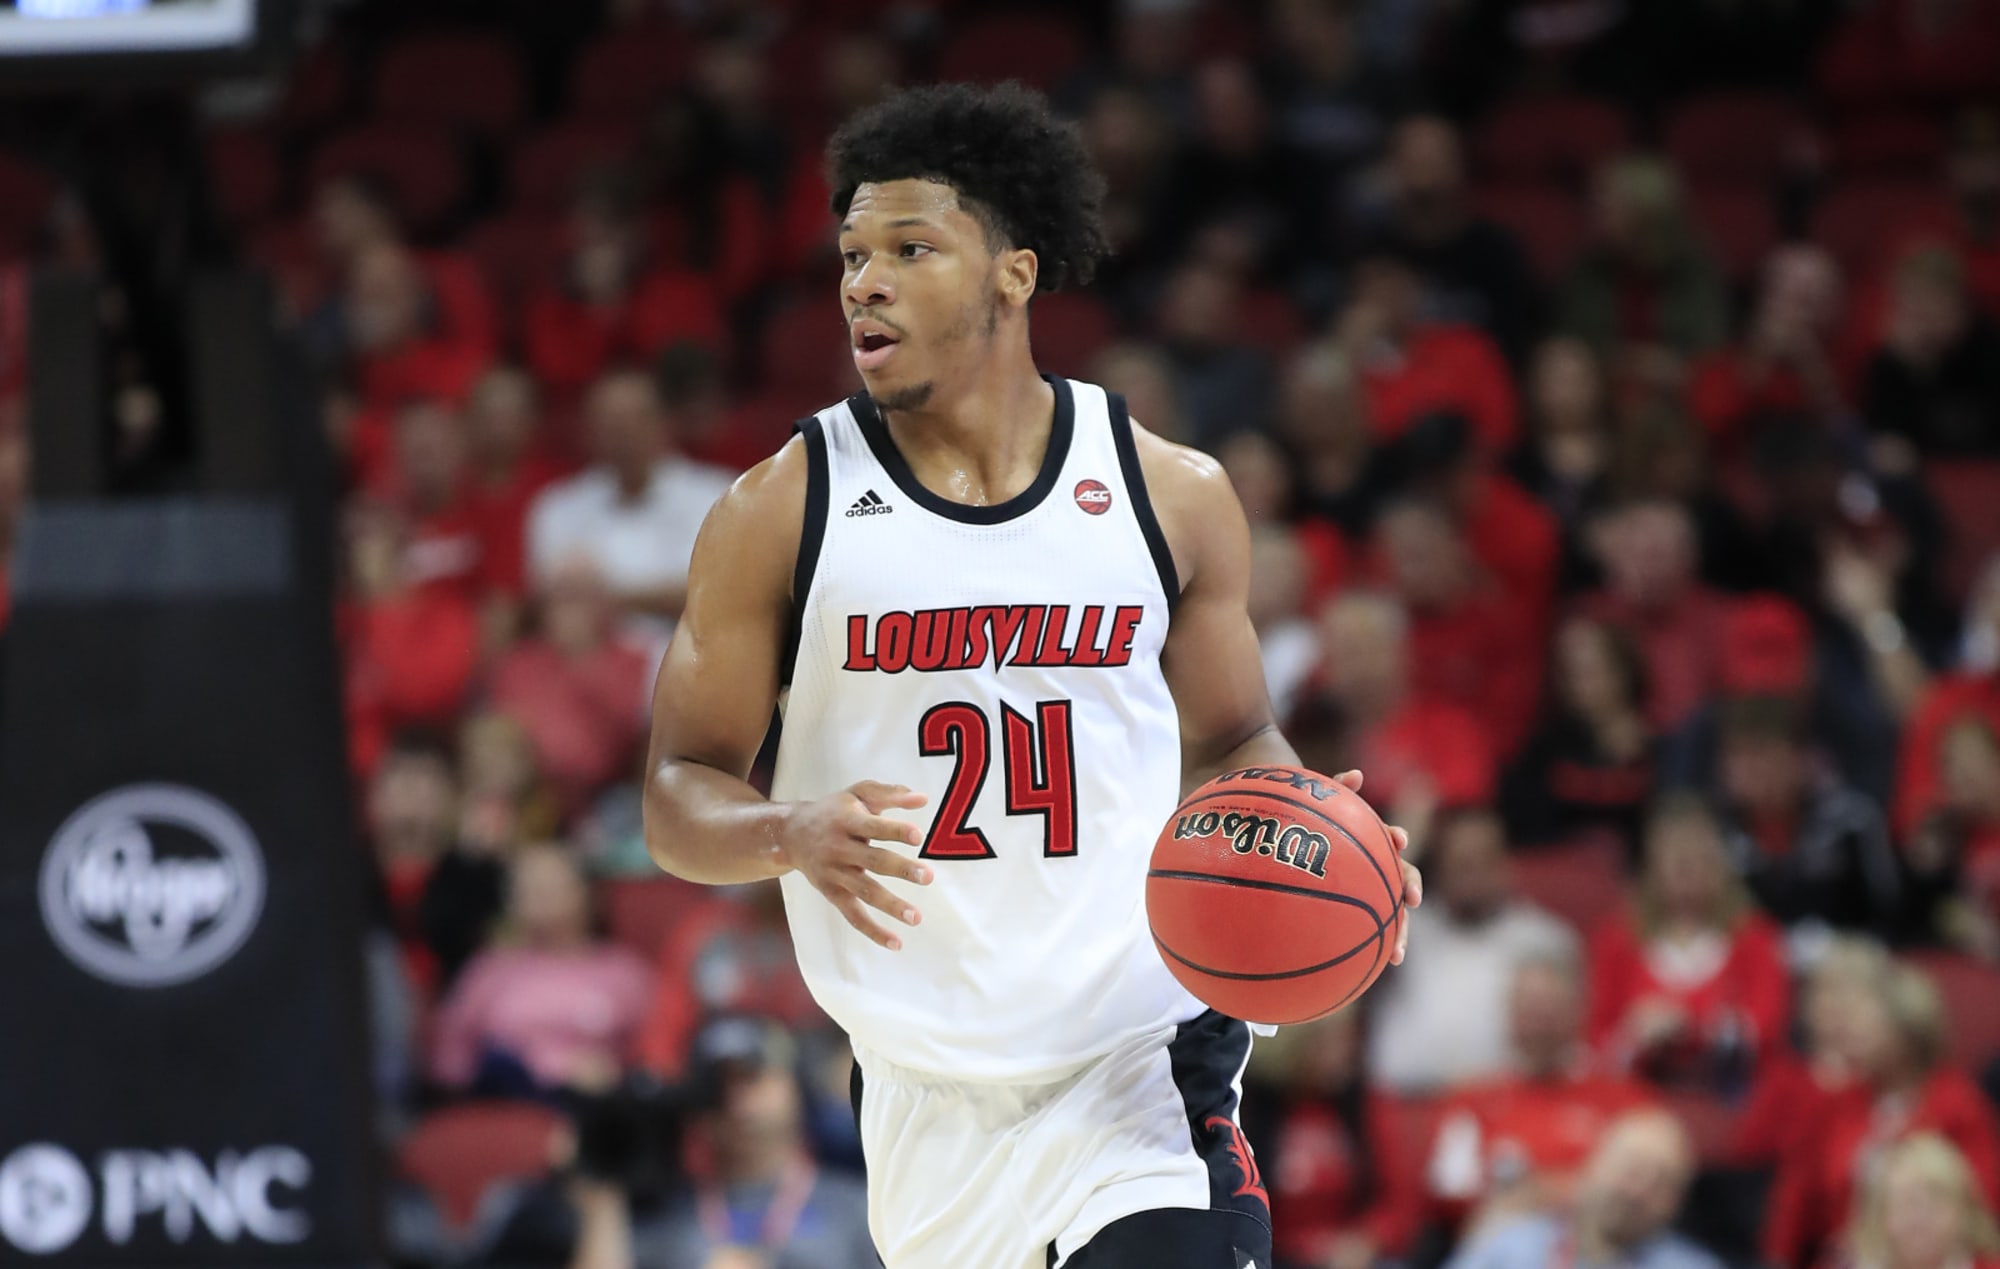 Louisville basketball: Indiana grad transfer could be next Dwayne Sutton